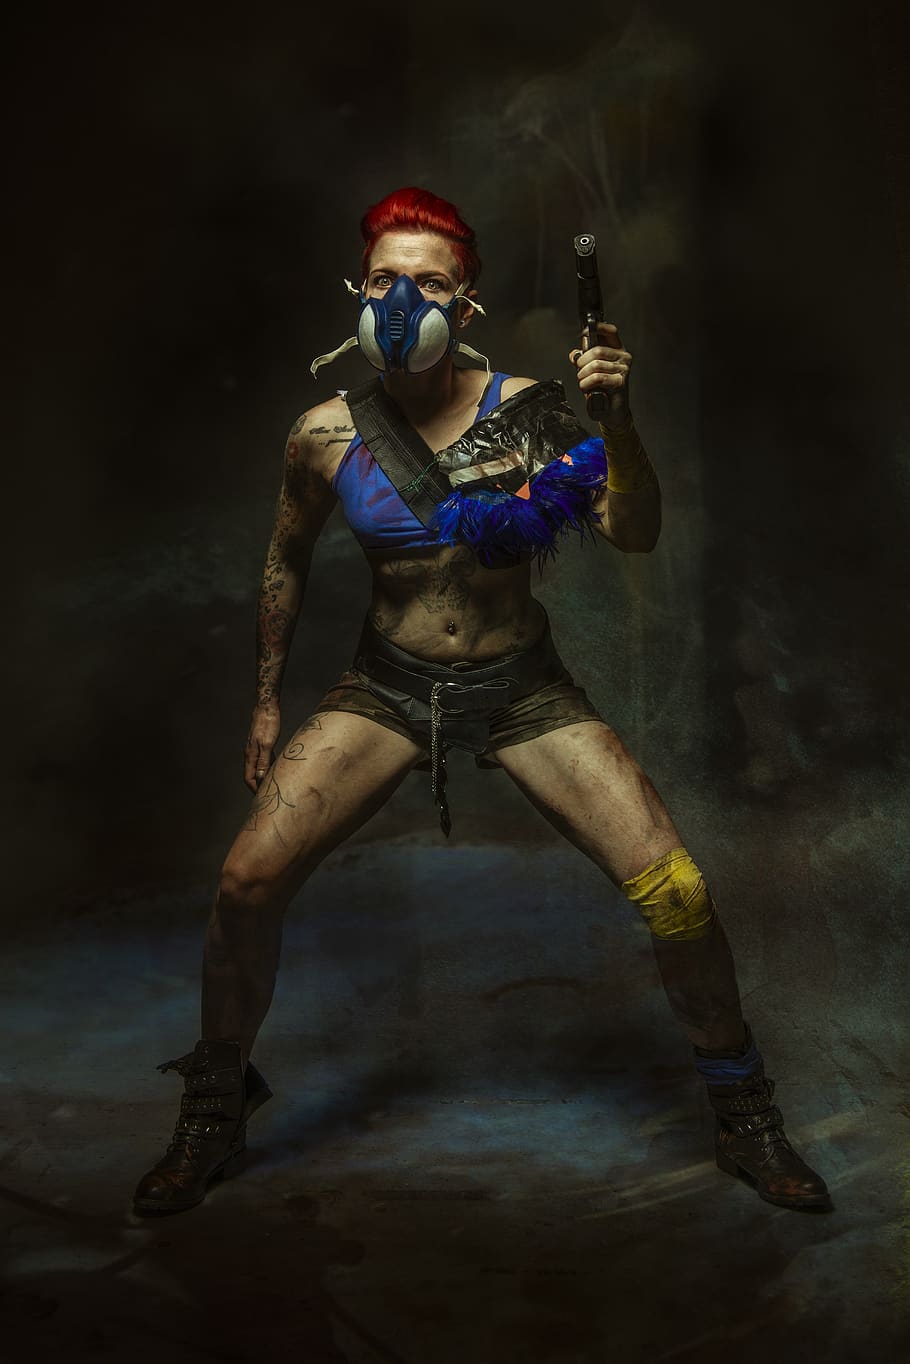 madmax, end time, red, hair, female, face, person, fight, weapon, pistol